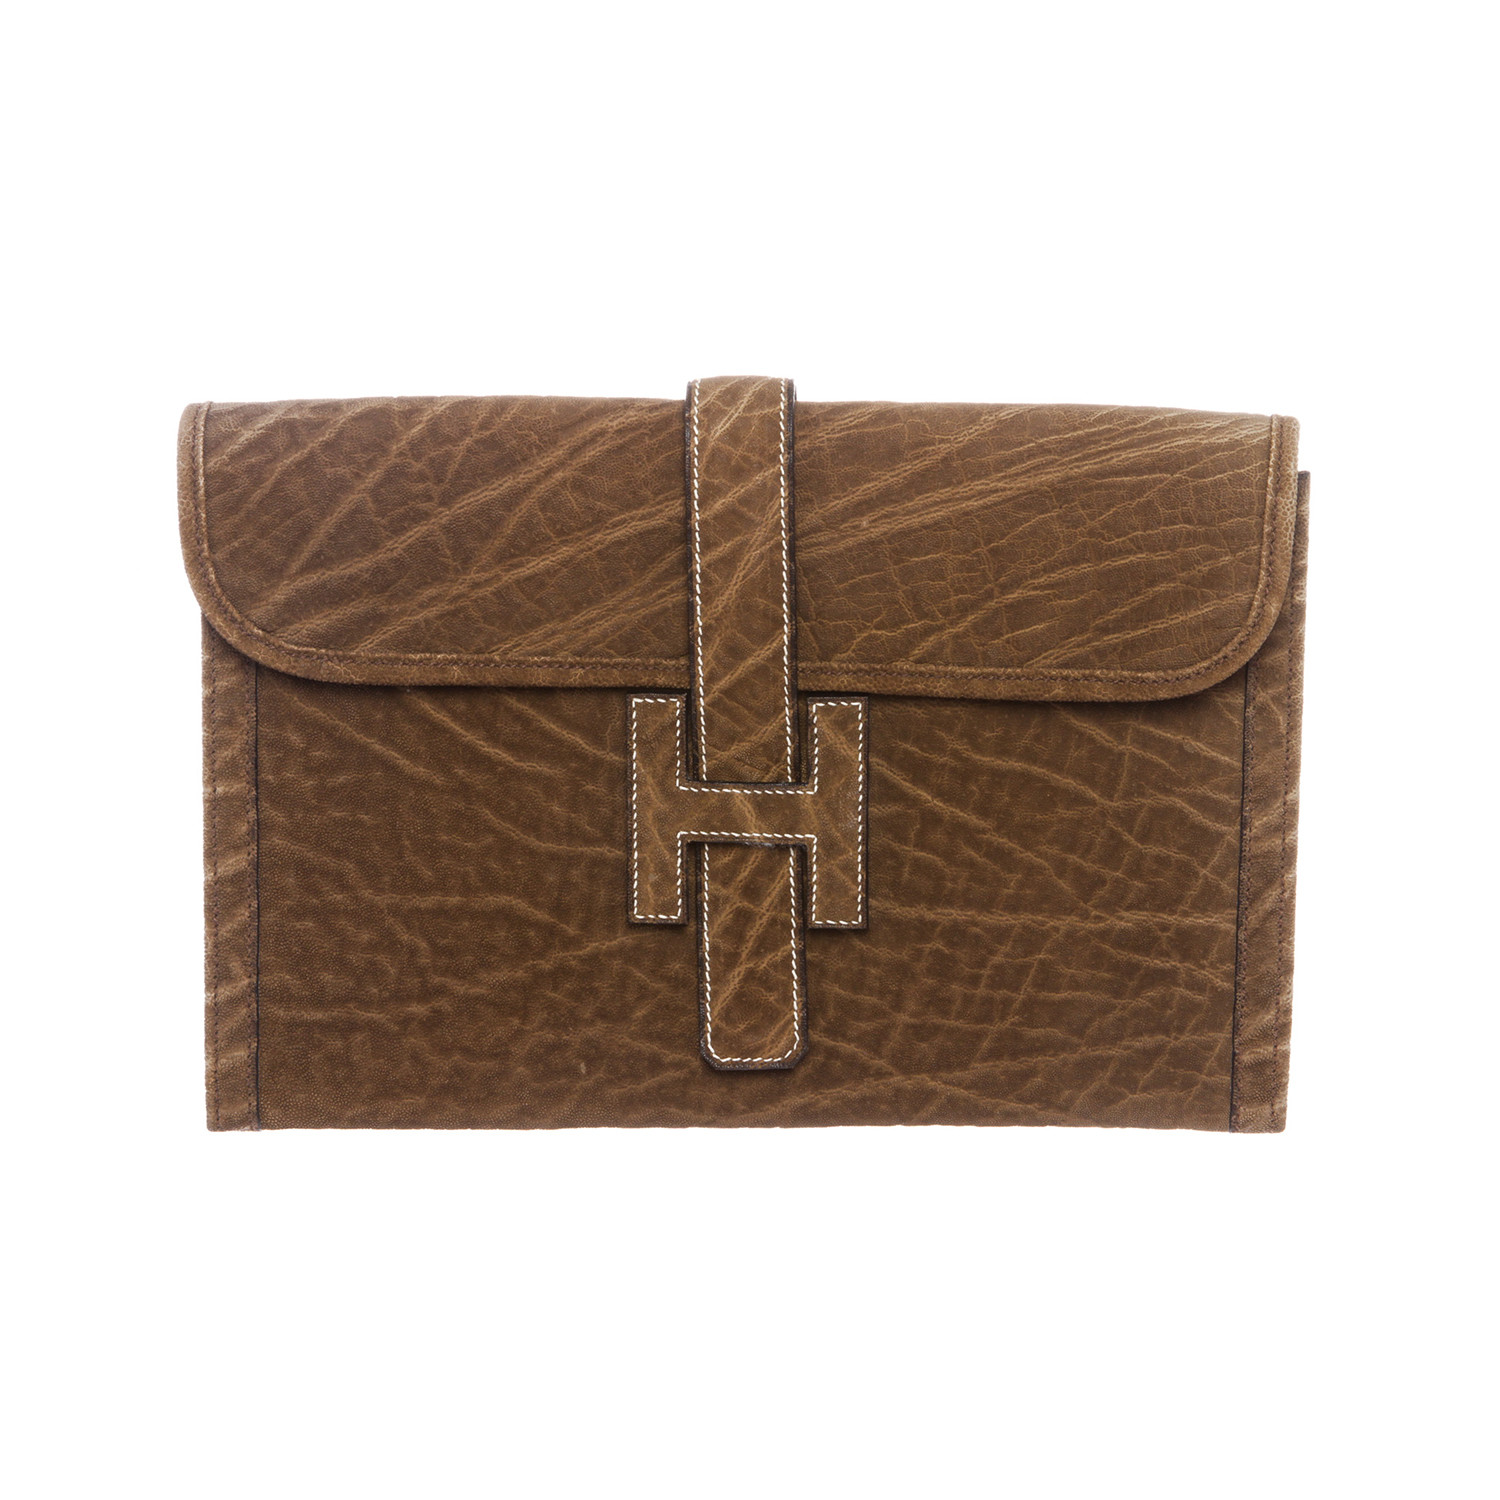 Elephant Skin Jige Clutch Bag // Brown // Preowned - Marque Supply